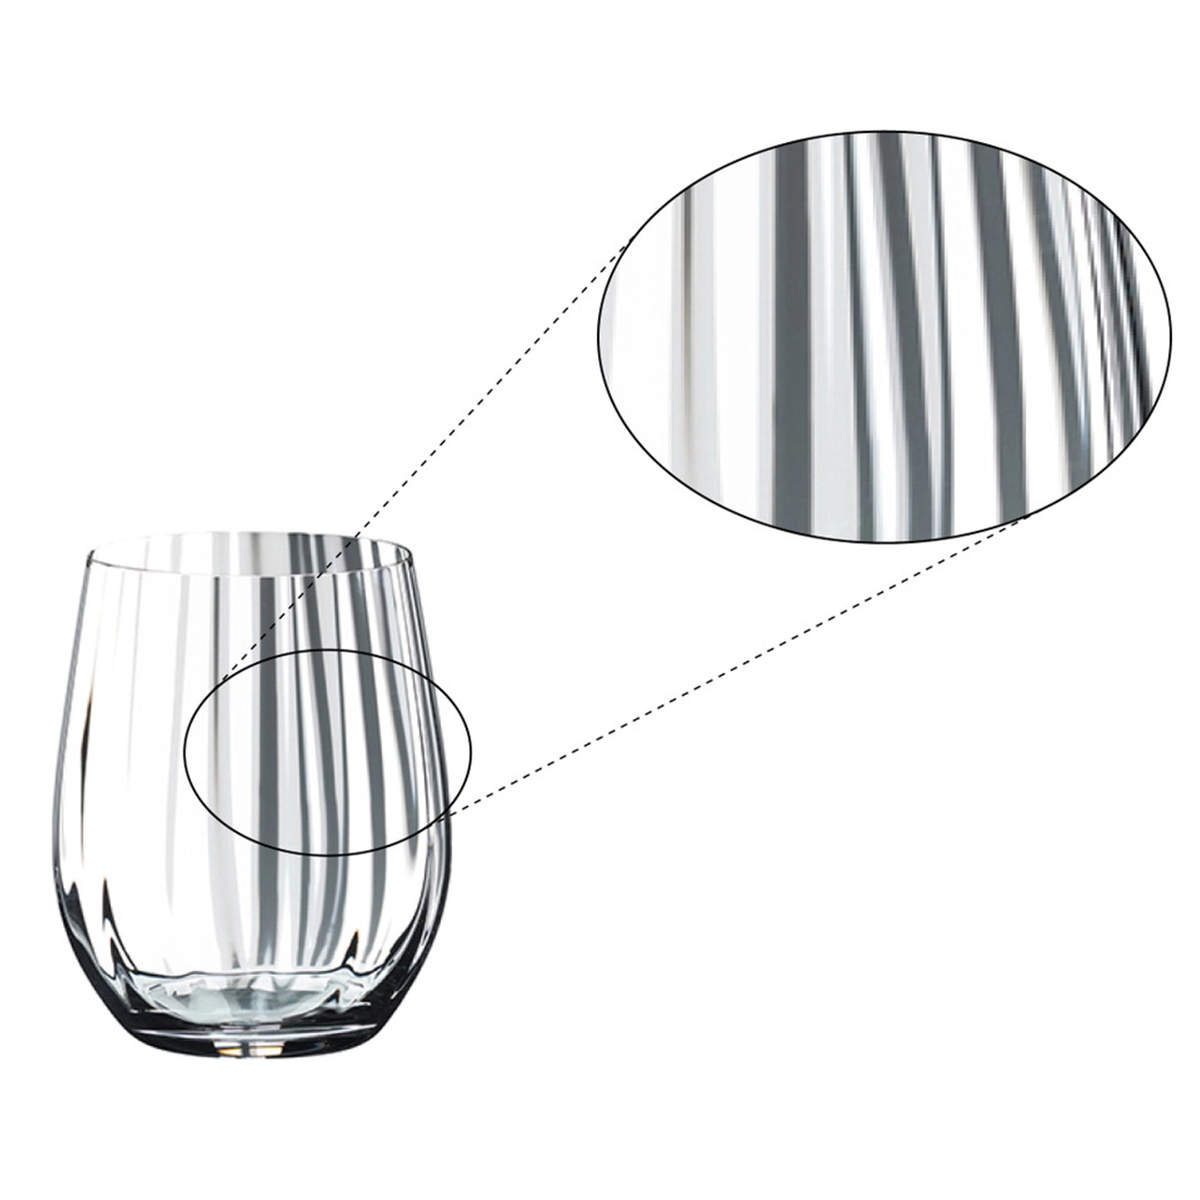 Whisky Glas Optisch O | Tumbler Collection - Riedel | 340 ml (2 Stk)